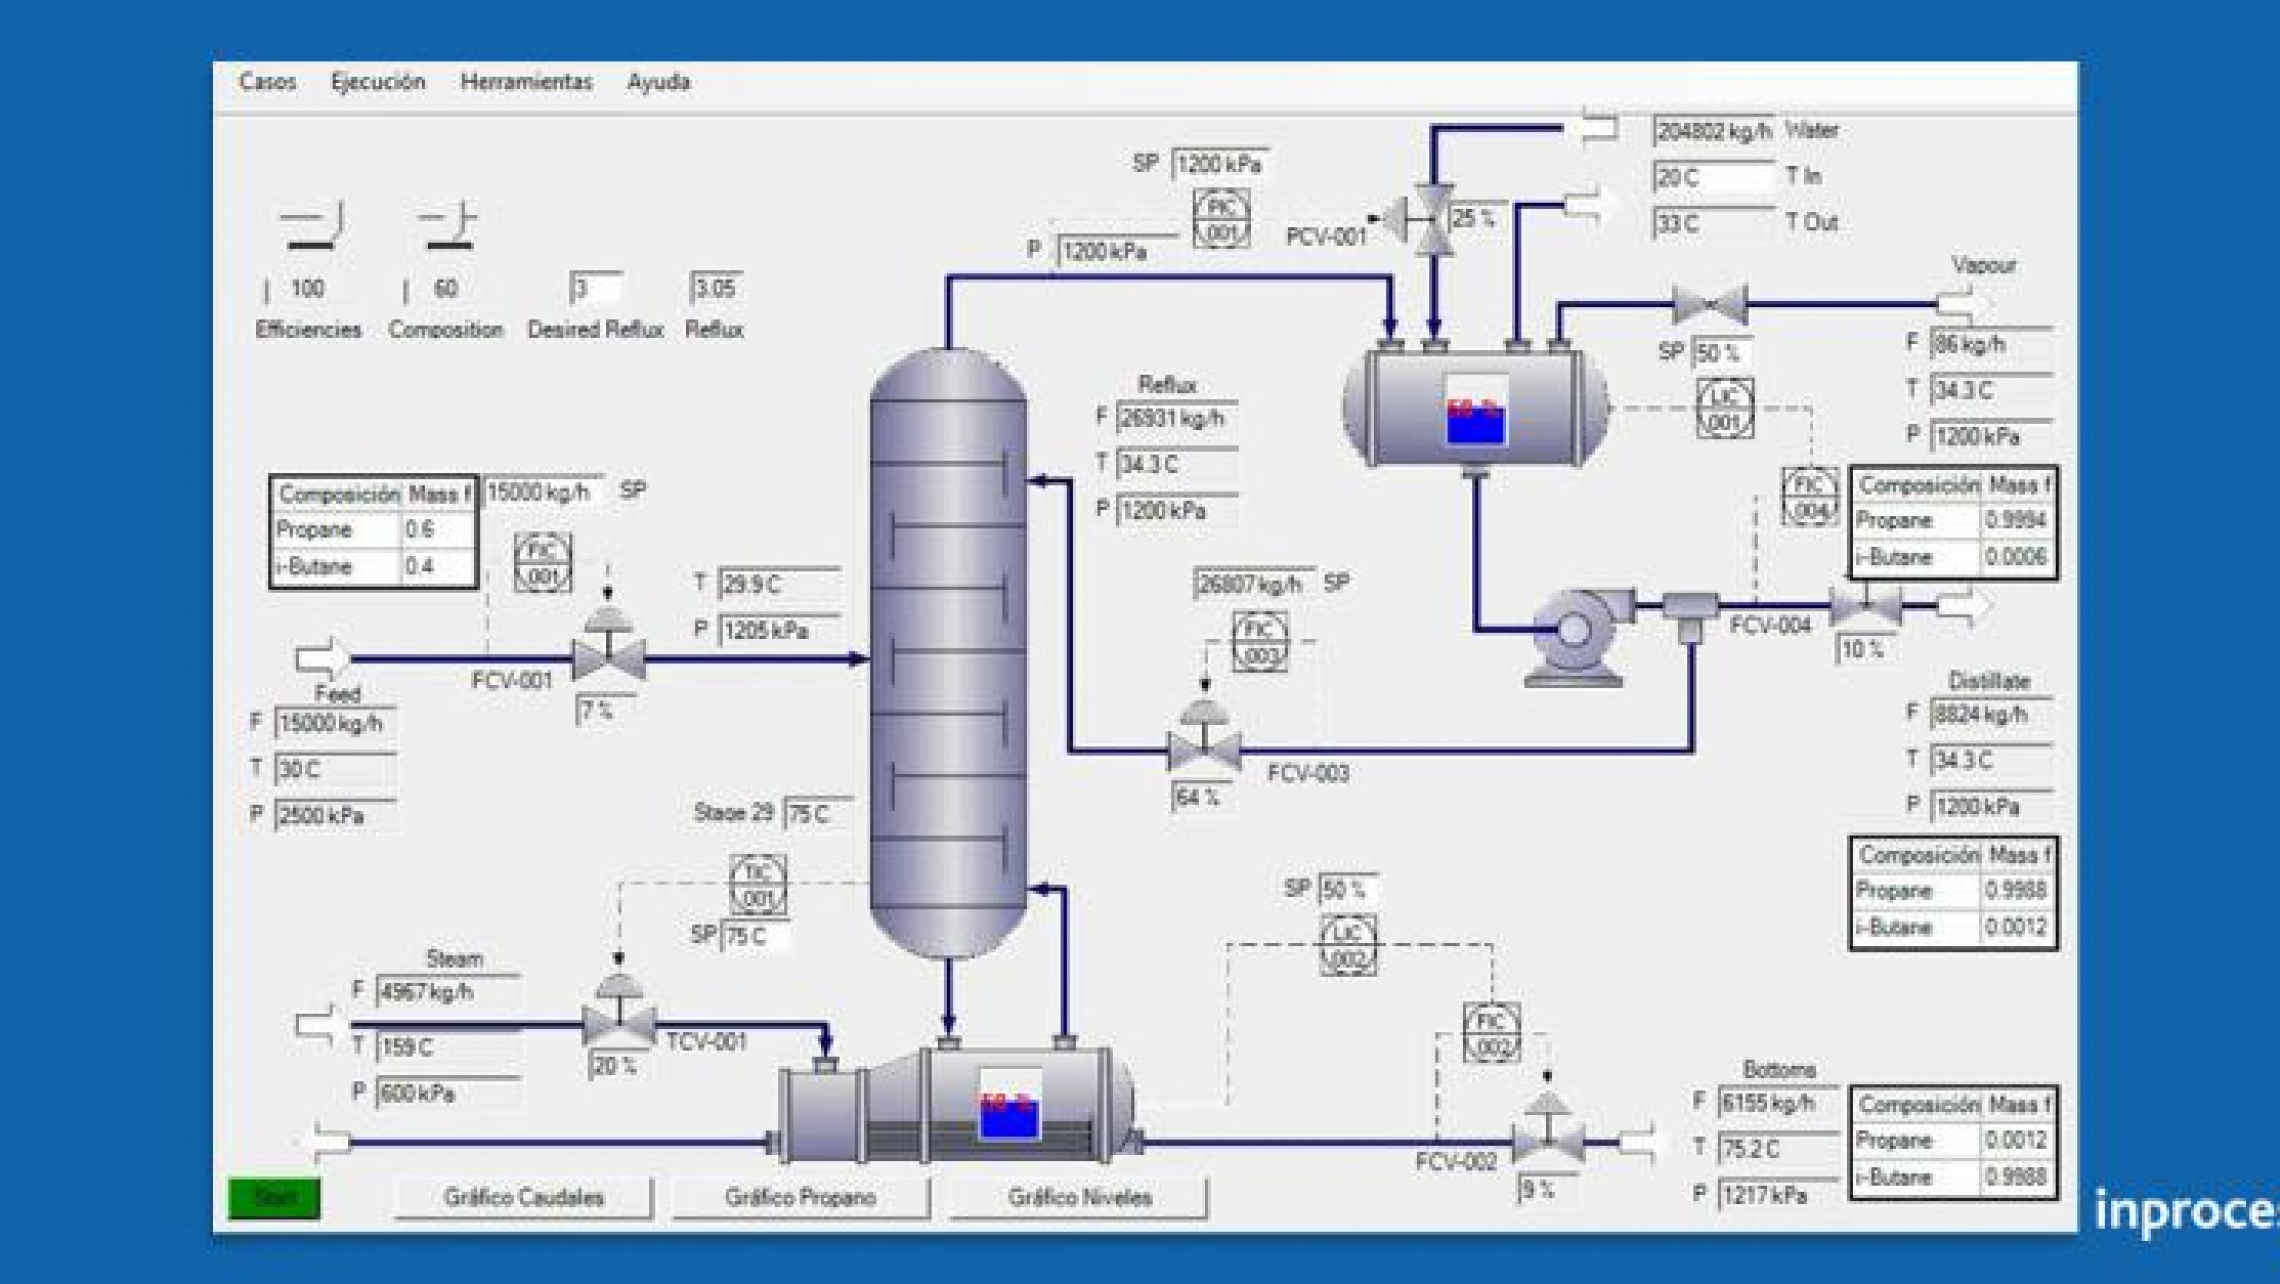 ITOP: Maintain and improve the know-how required to safely and efficiently operate the process plants